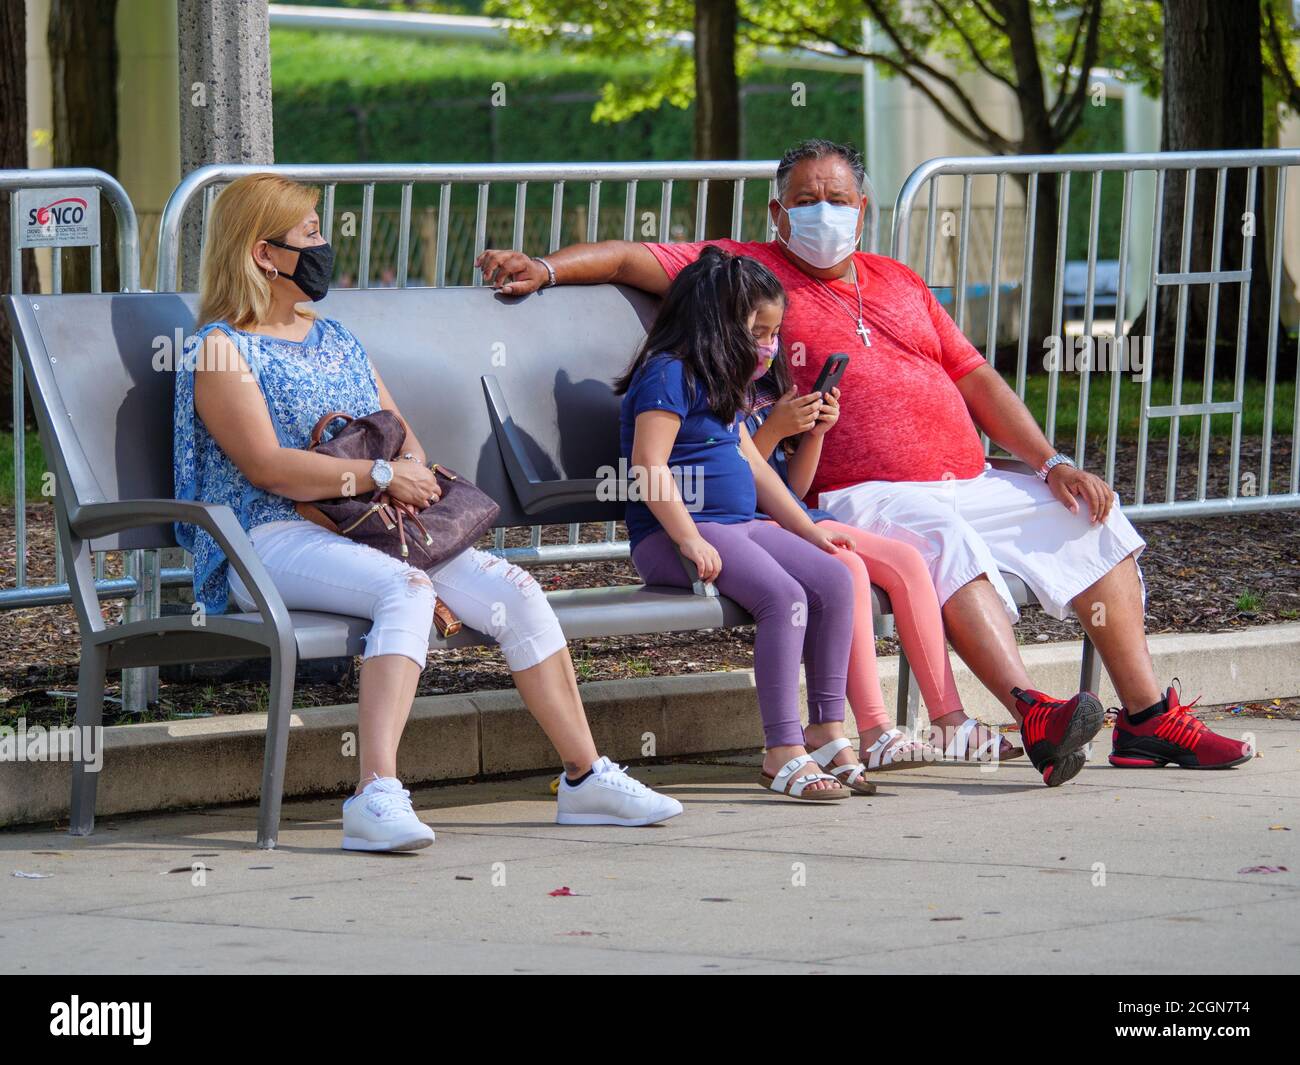 Family sitting on park bench, wearing face masks during COVID-19 pandemic. Millennium Park, Chicago, Illinois. Stock Photo